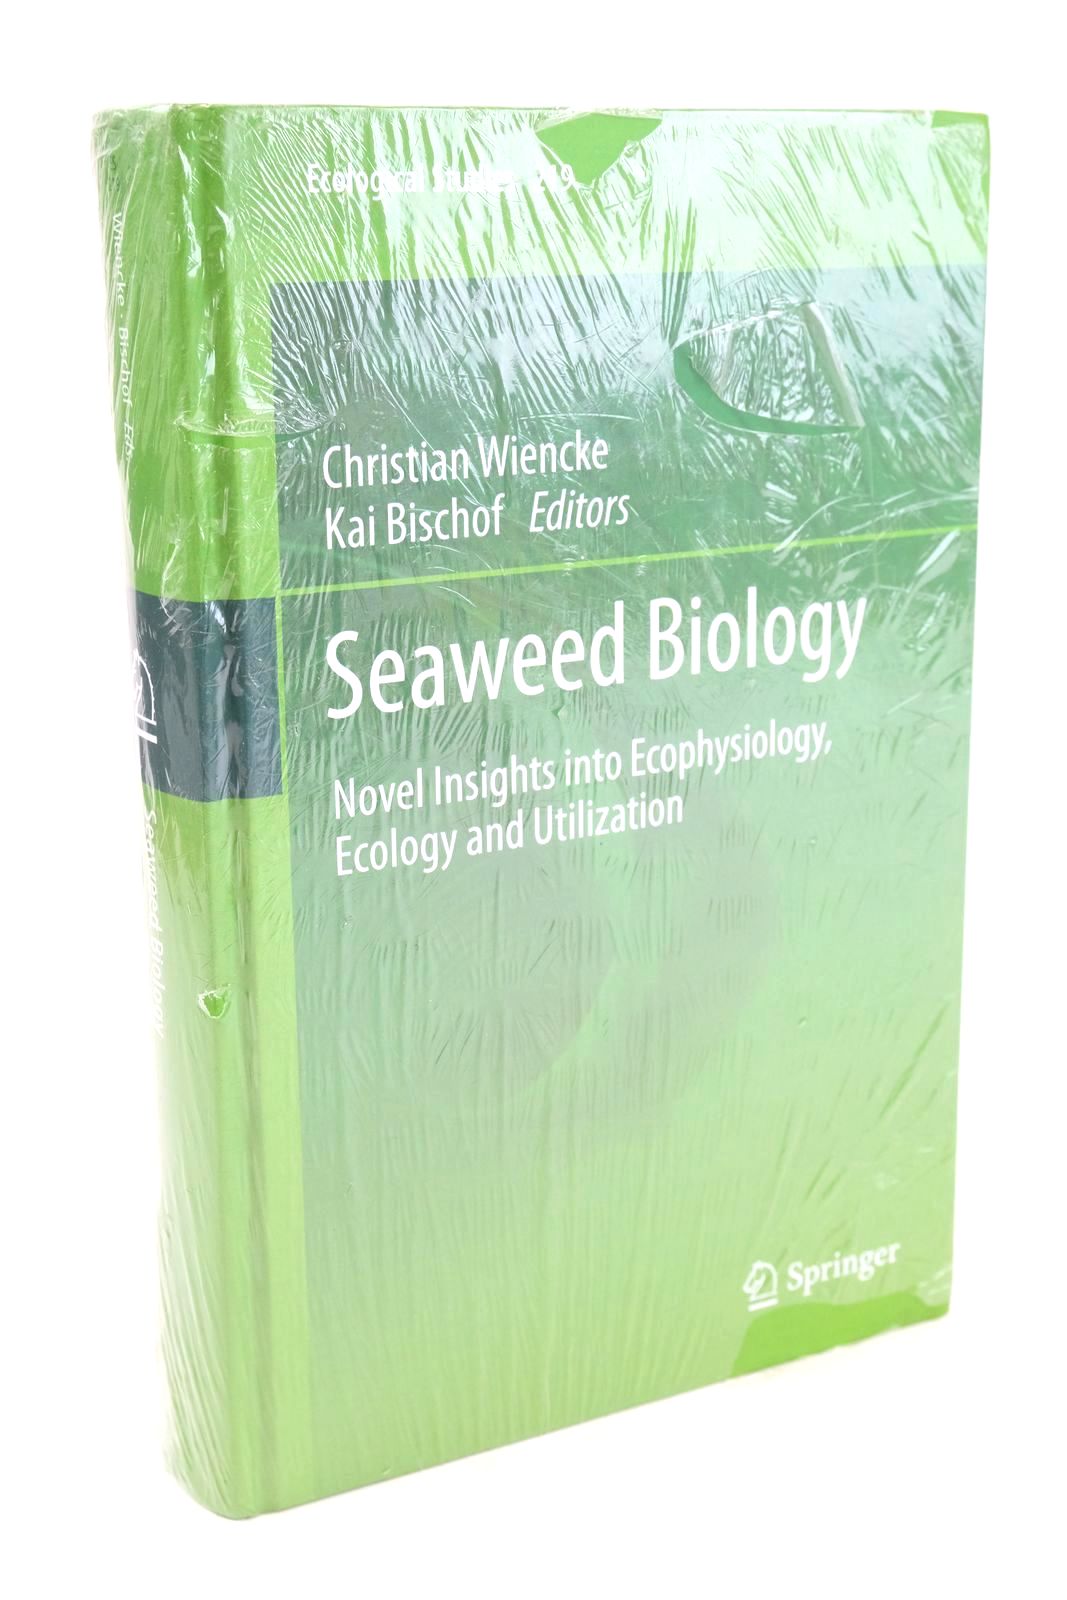 Photo of SEAWEED BIOLOGY NOVEL INSIGHTS INTO ECOPHYSIOLOGY, ECOLOGY AND UTILIZATION written by Wiencke, Christian Bischof, Kai published by Springer (STOCK CODE: 1324959)  for sale by Stella & Rose's Books